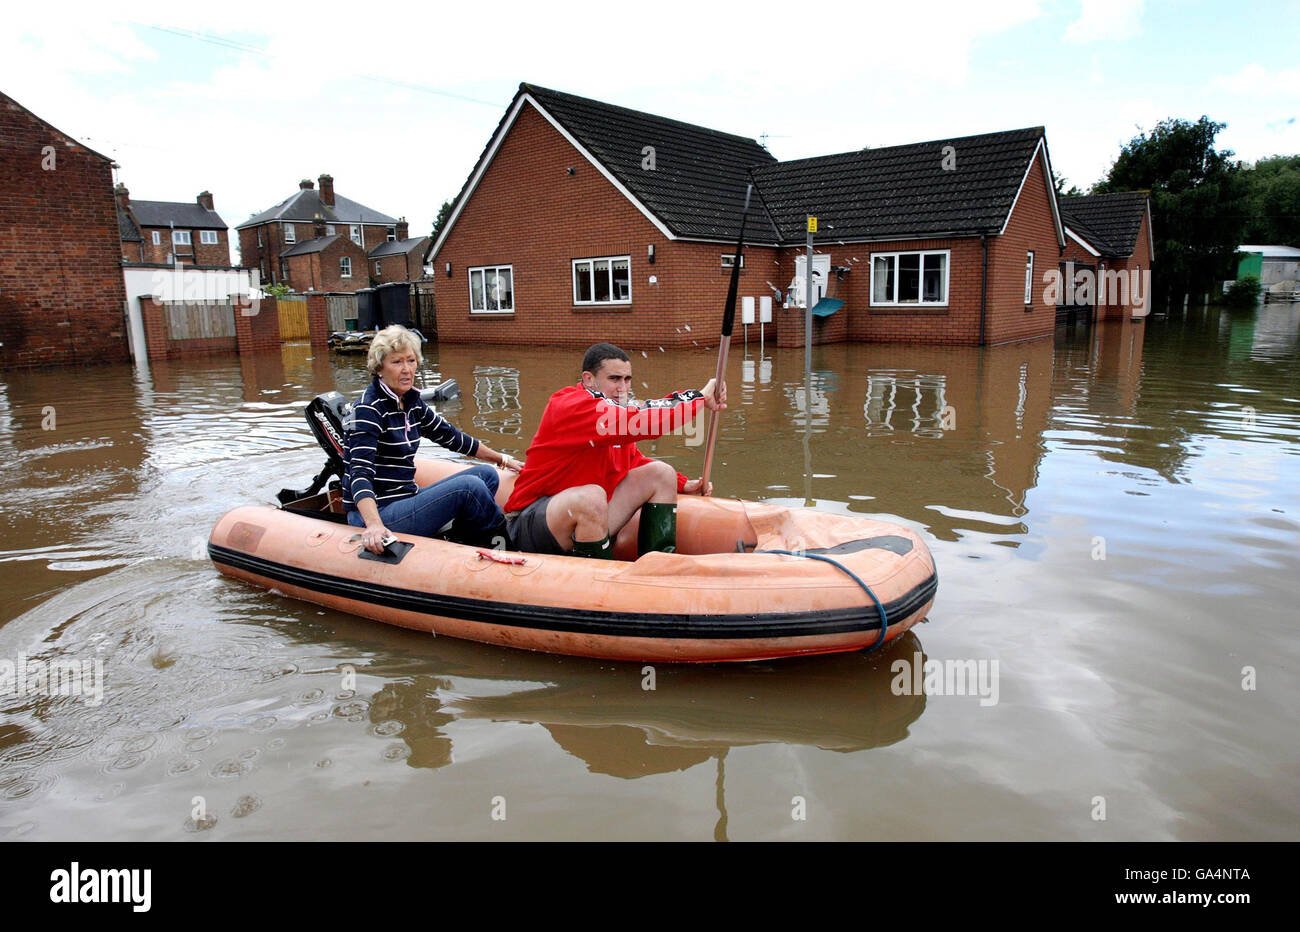 Storms hit the UK. A woman is taken from her home to dry ground in a flooded area close to the river Severn in Gloucester. Stock Photo